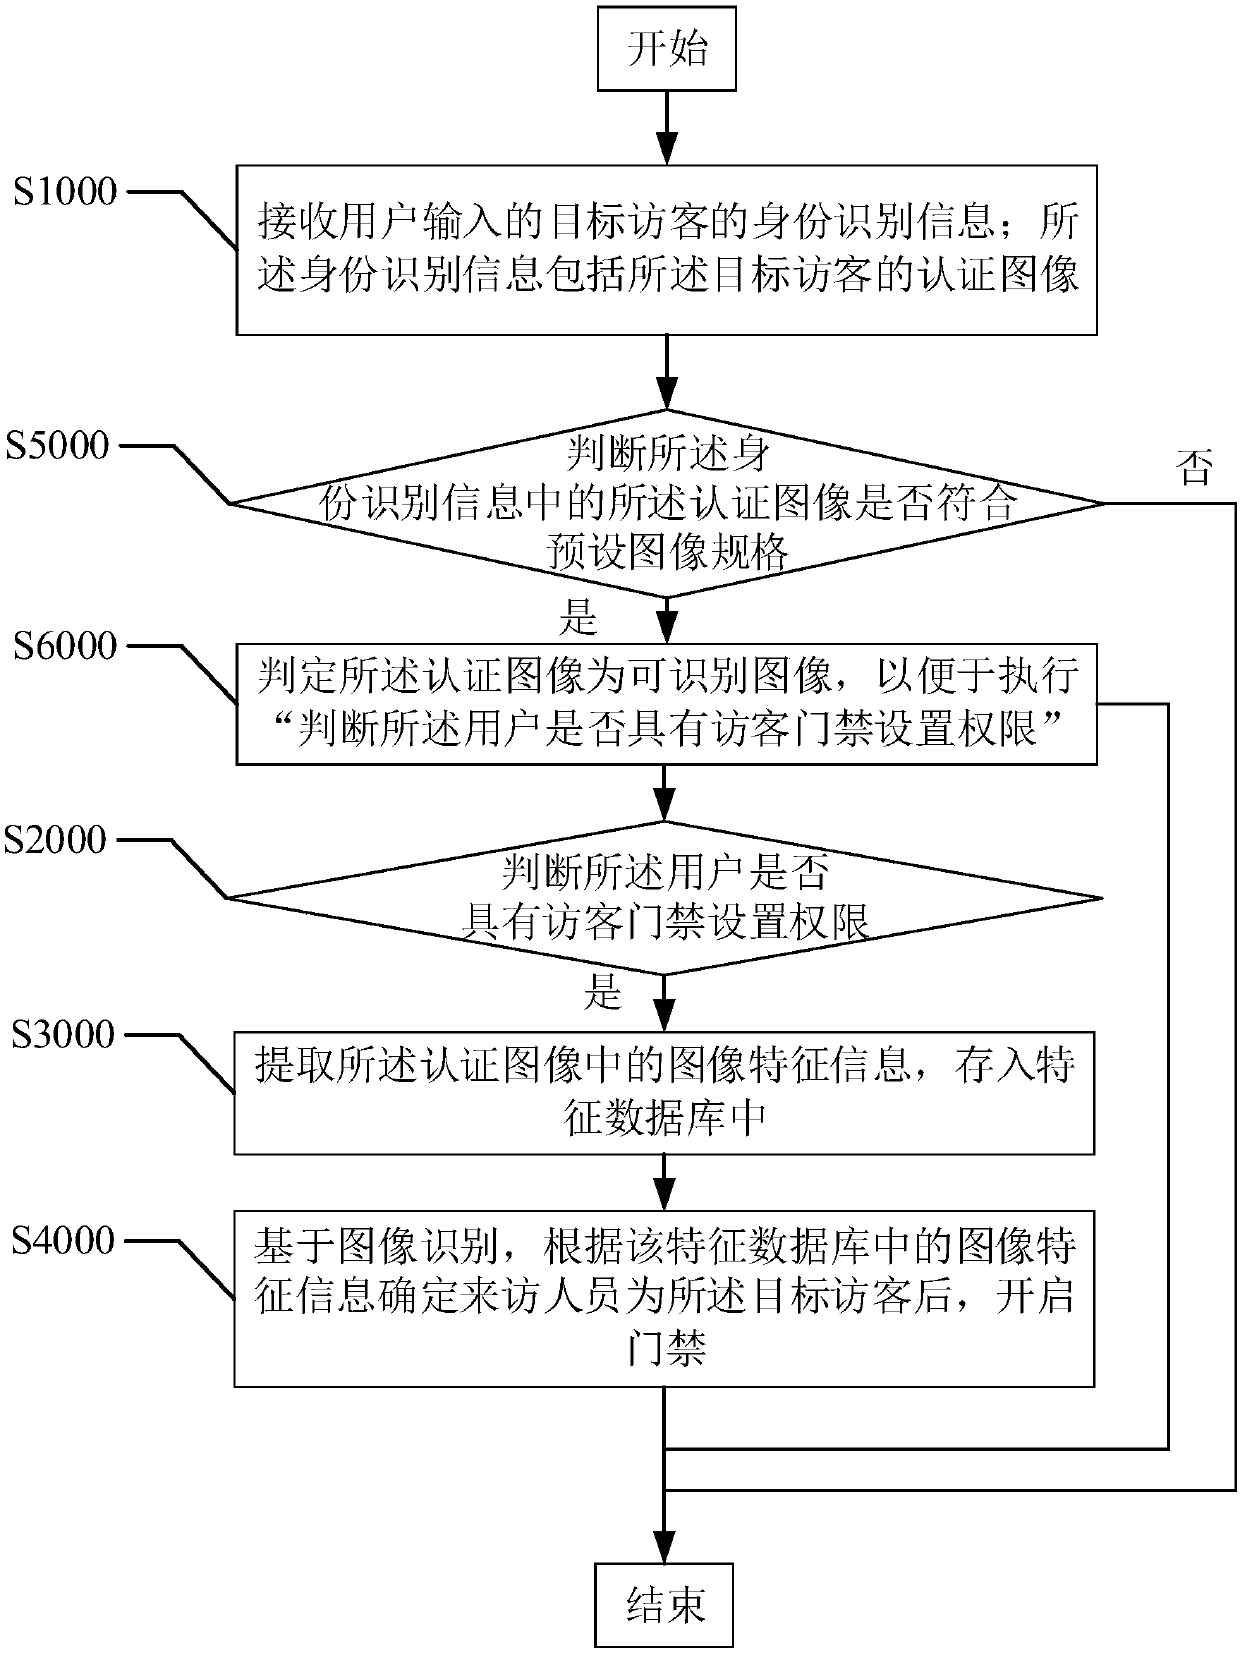 Method and device for controlling visitor access control system based on image recognition